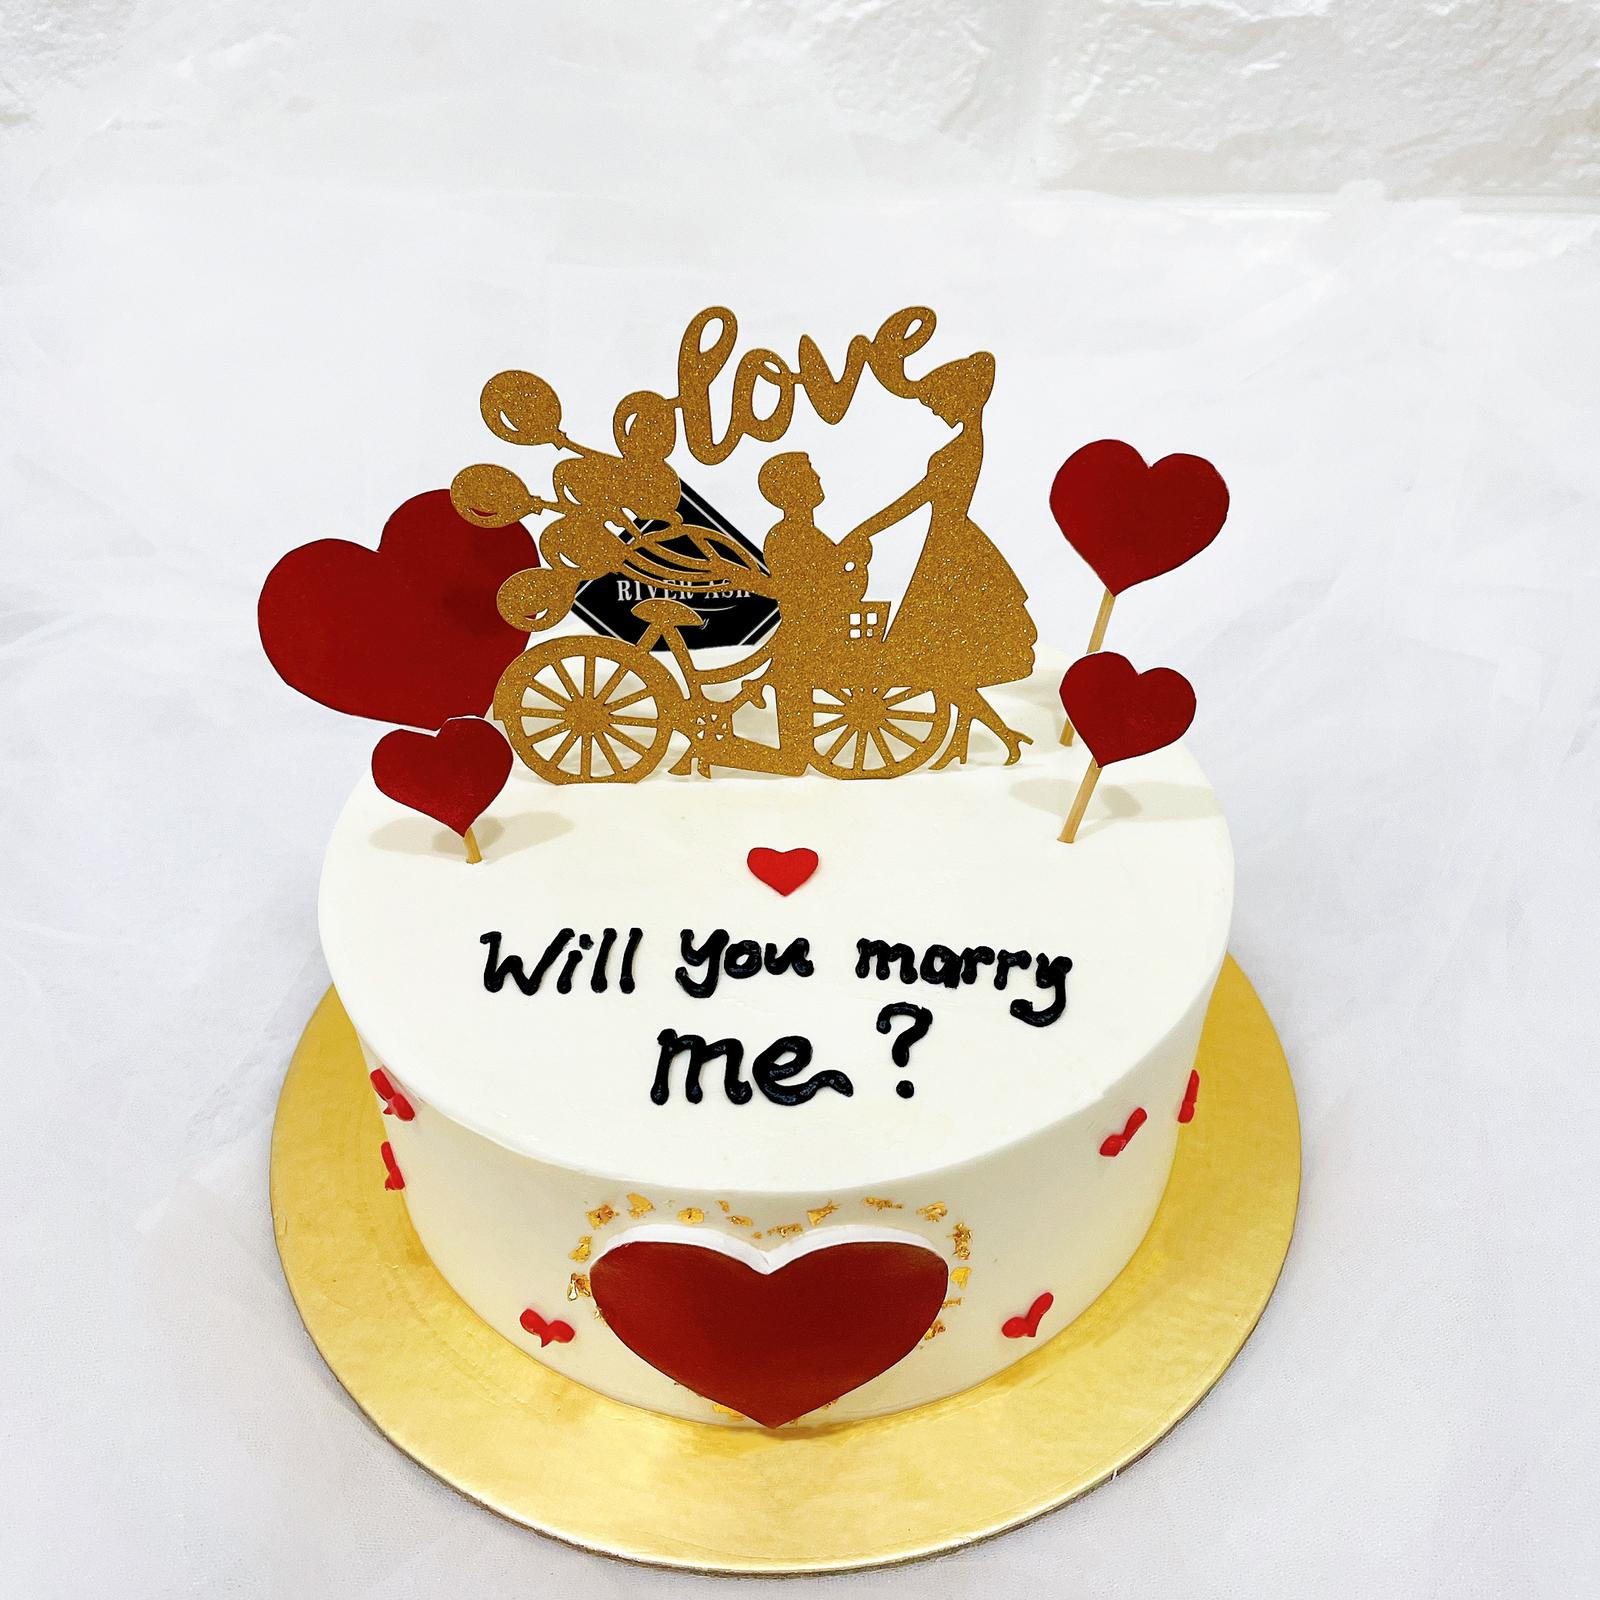 6” Vanilla and Red velvet marble fondant proposal cake with fresh roses –  Yaa's Baked Goods Galore